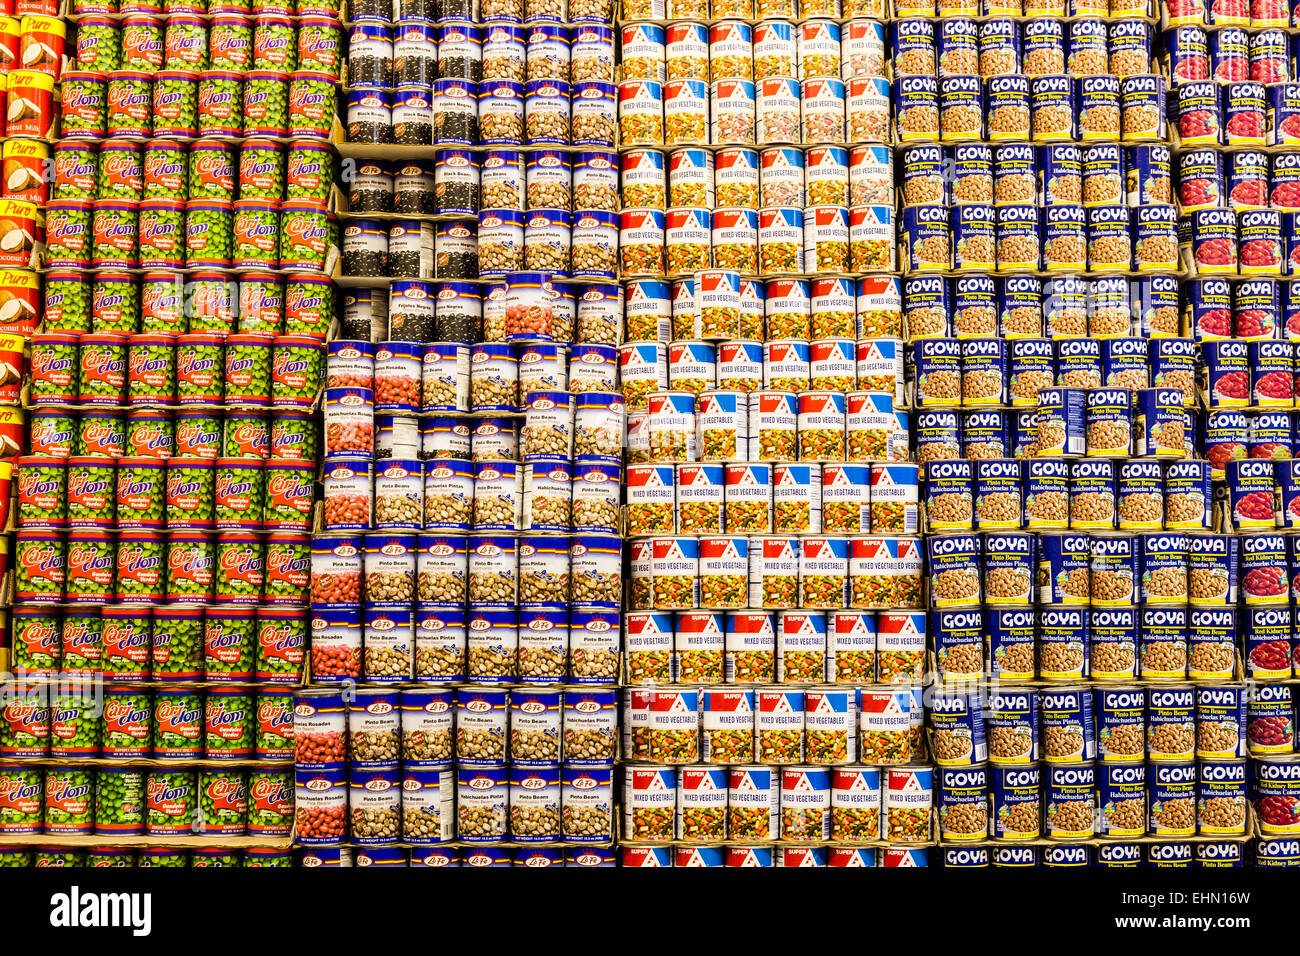 Cans in an american supermarket. Stock Photo